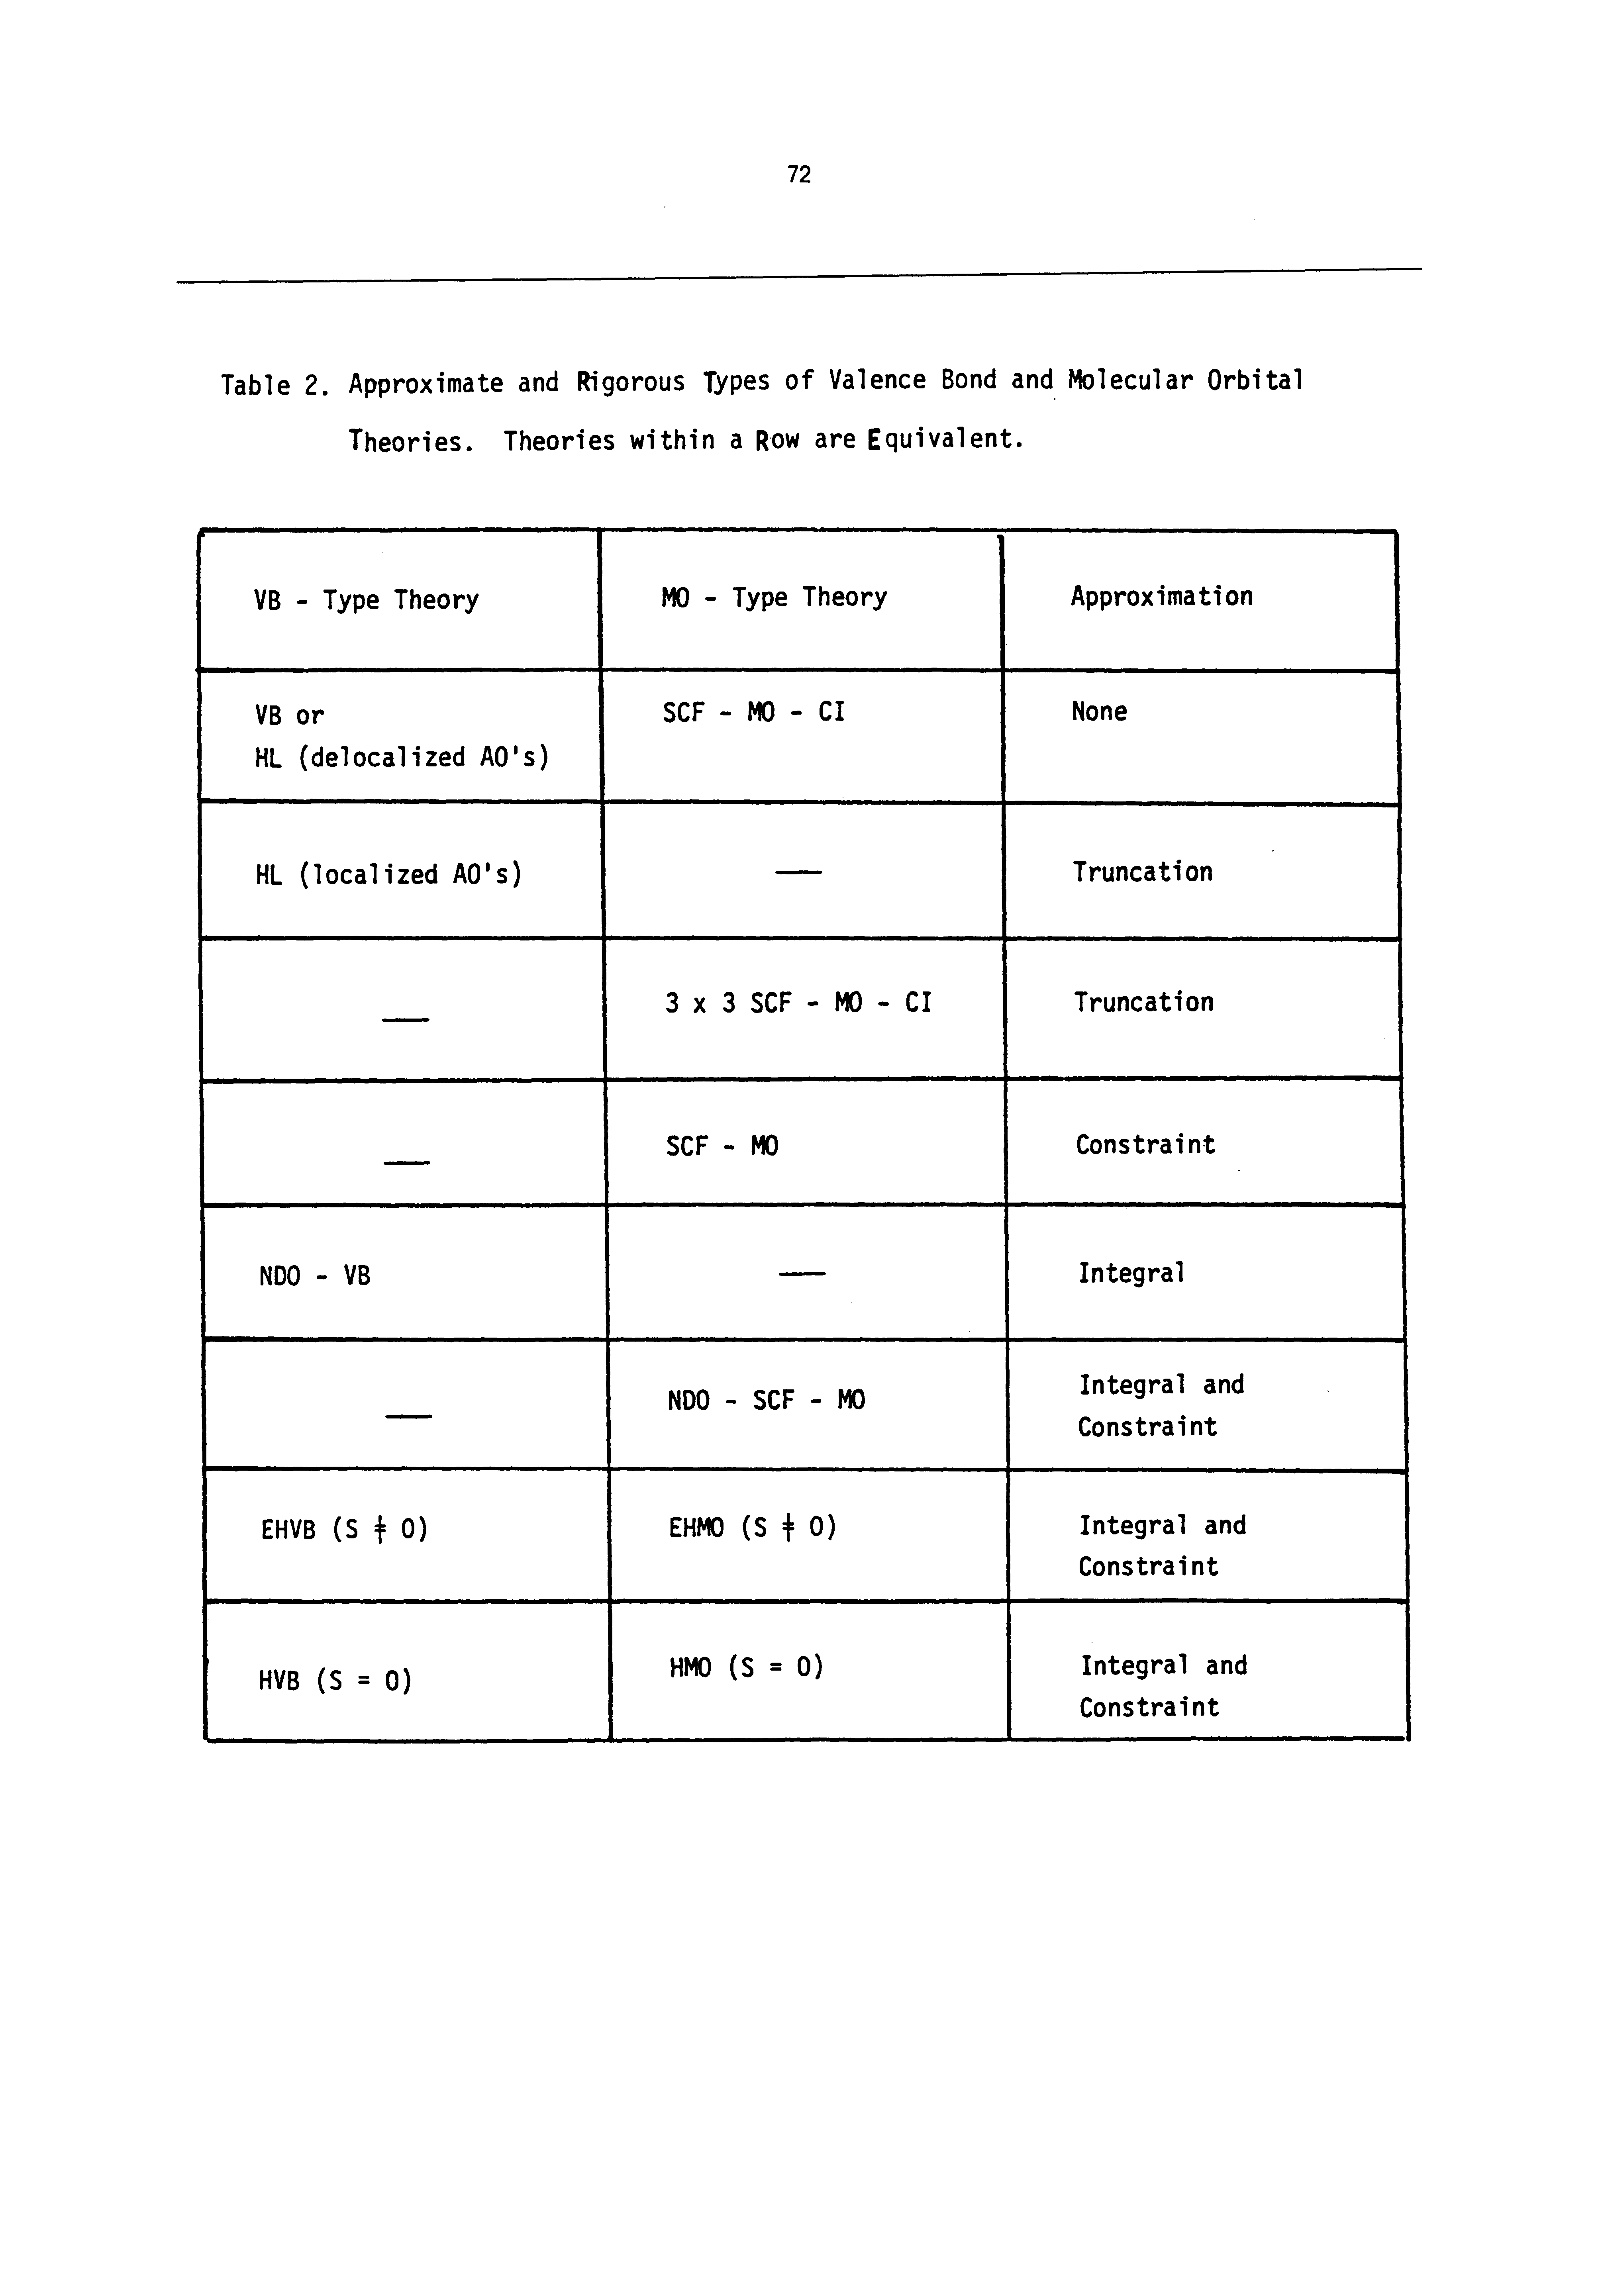 Table 2. Approximate and Rigorous Types of Valence Bond and Molecular Orbital Theories. Theories within a Row are Equivalent.